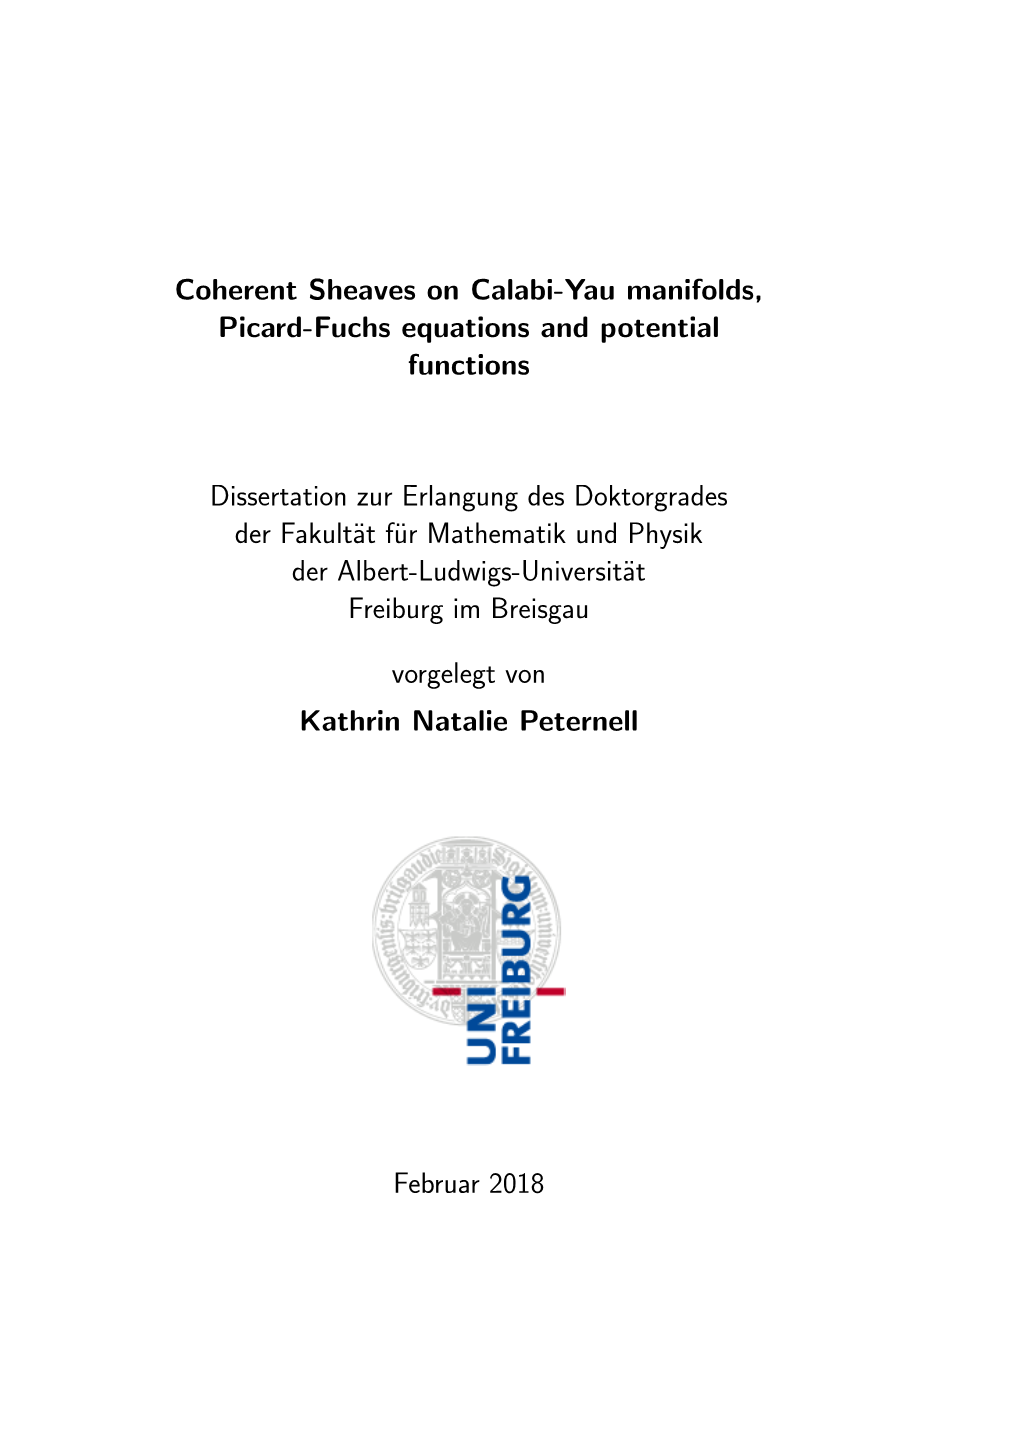 Coherent Sheaves on Calabi-Yau Manifolds, Picard-Fuchs Equations and Potential Functions Dissertation Zur Erlangung Des Doktorgr